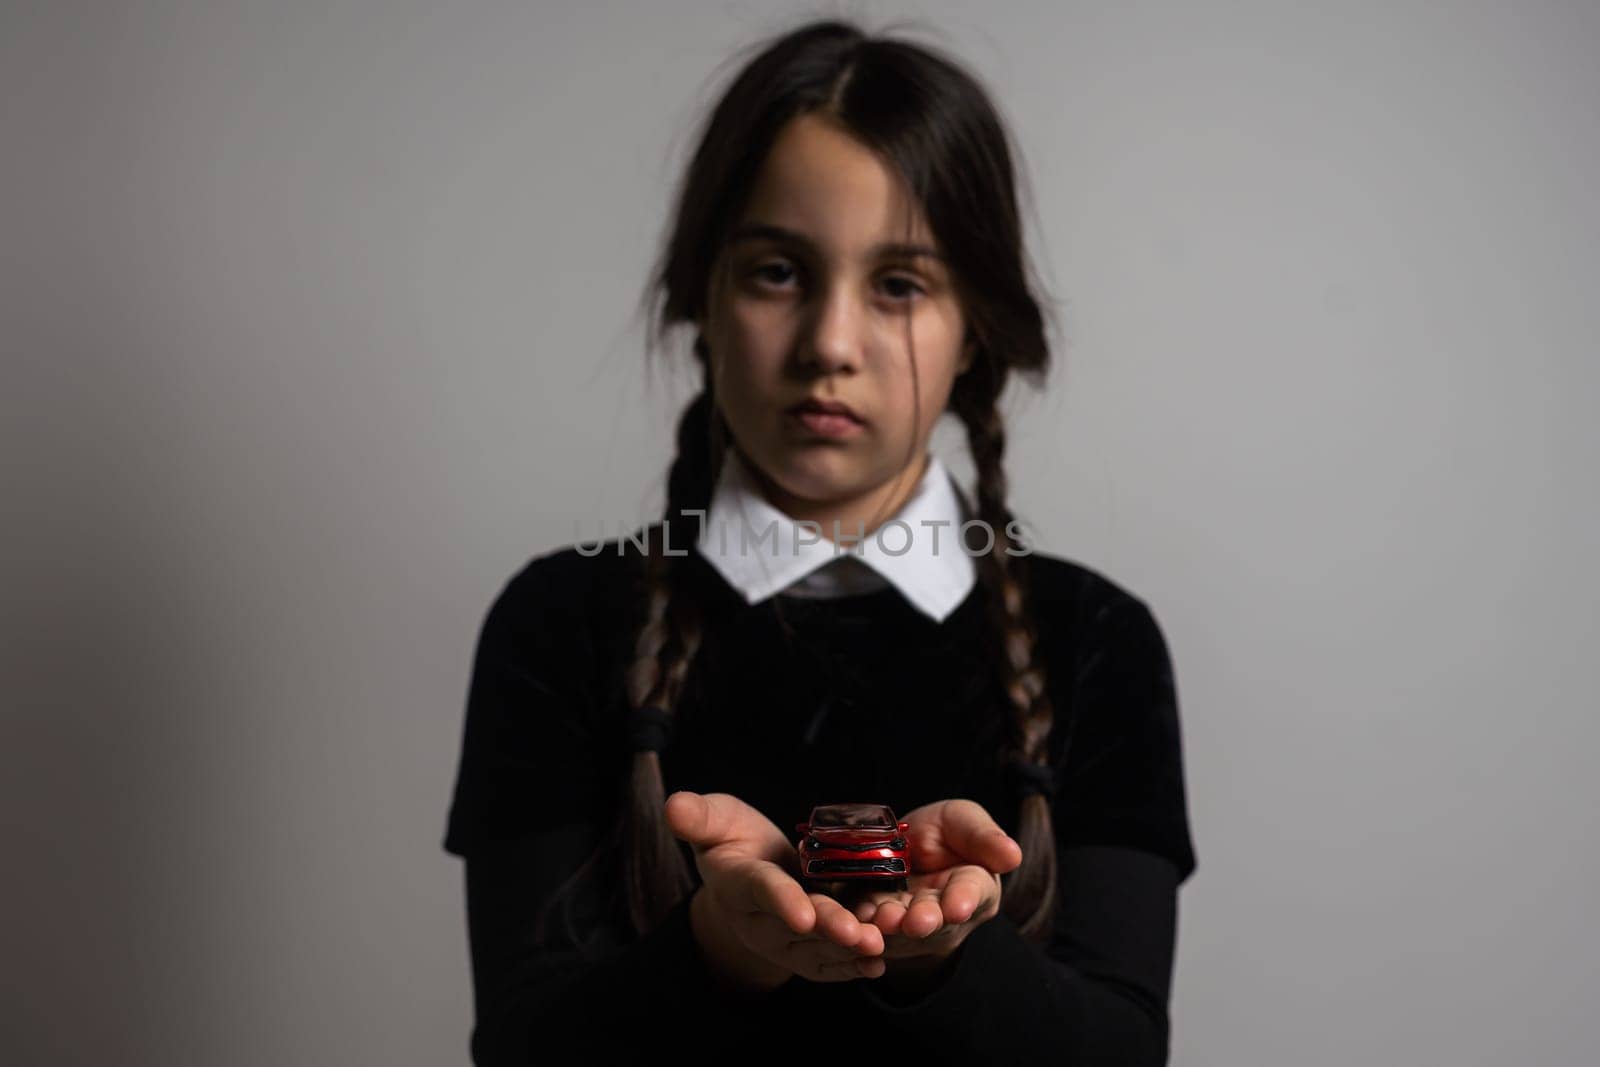 A girl with braids in a gothic style on a dark background with toy car.